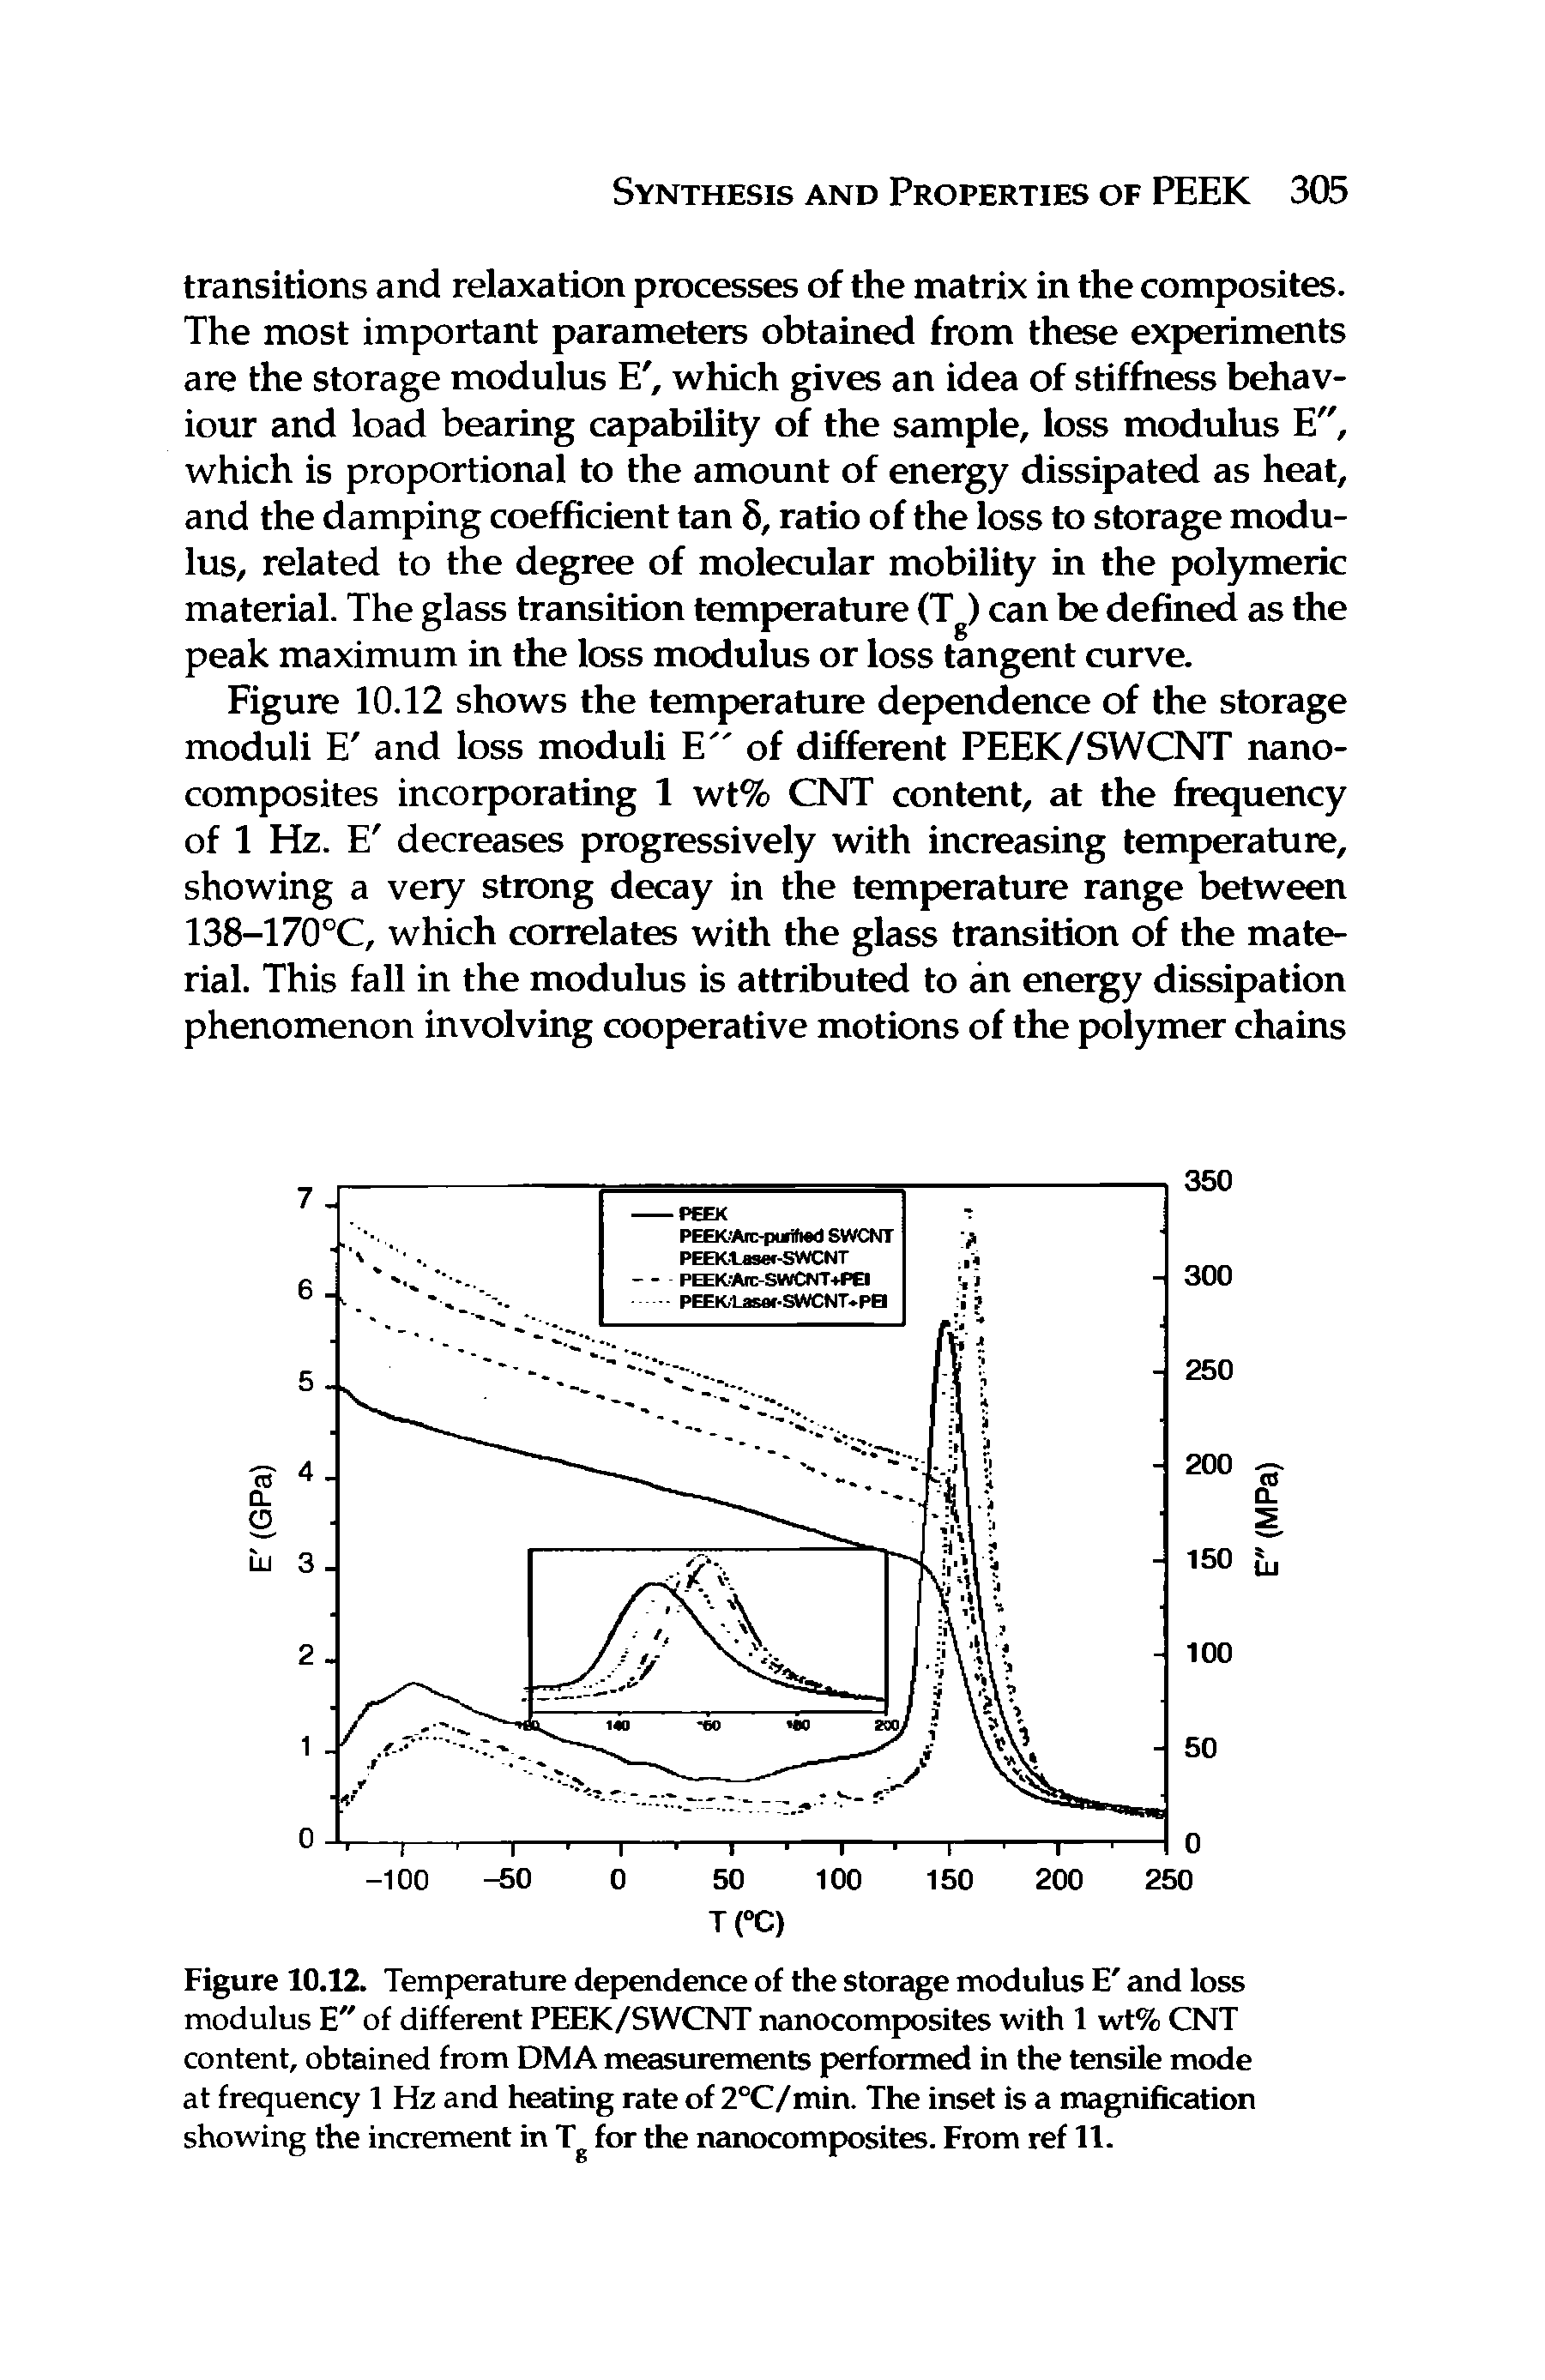 Figure 10.12. Temperature dependence of the storage modulus E and loss modulus E" of different PEEK/SWCNT nanocomposites with 1 wt% CNT content, obtained from DMA measurements performed in the tensile mode at frequency 1 Hz and heating rate of 2°C/min. The inset is a magnification showing the increment in Tg for the nanocomposites. From ref 11.